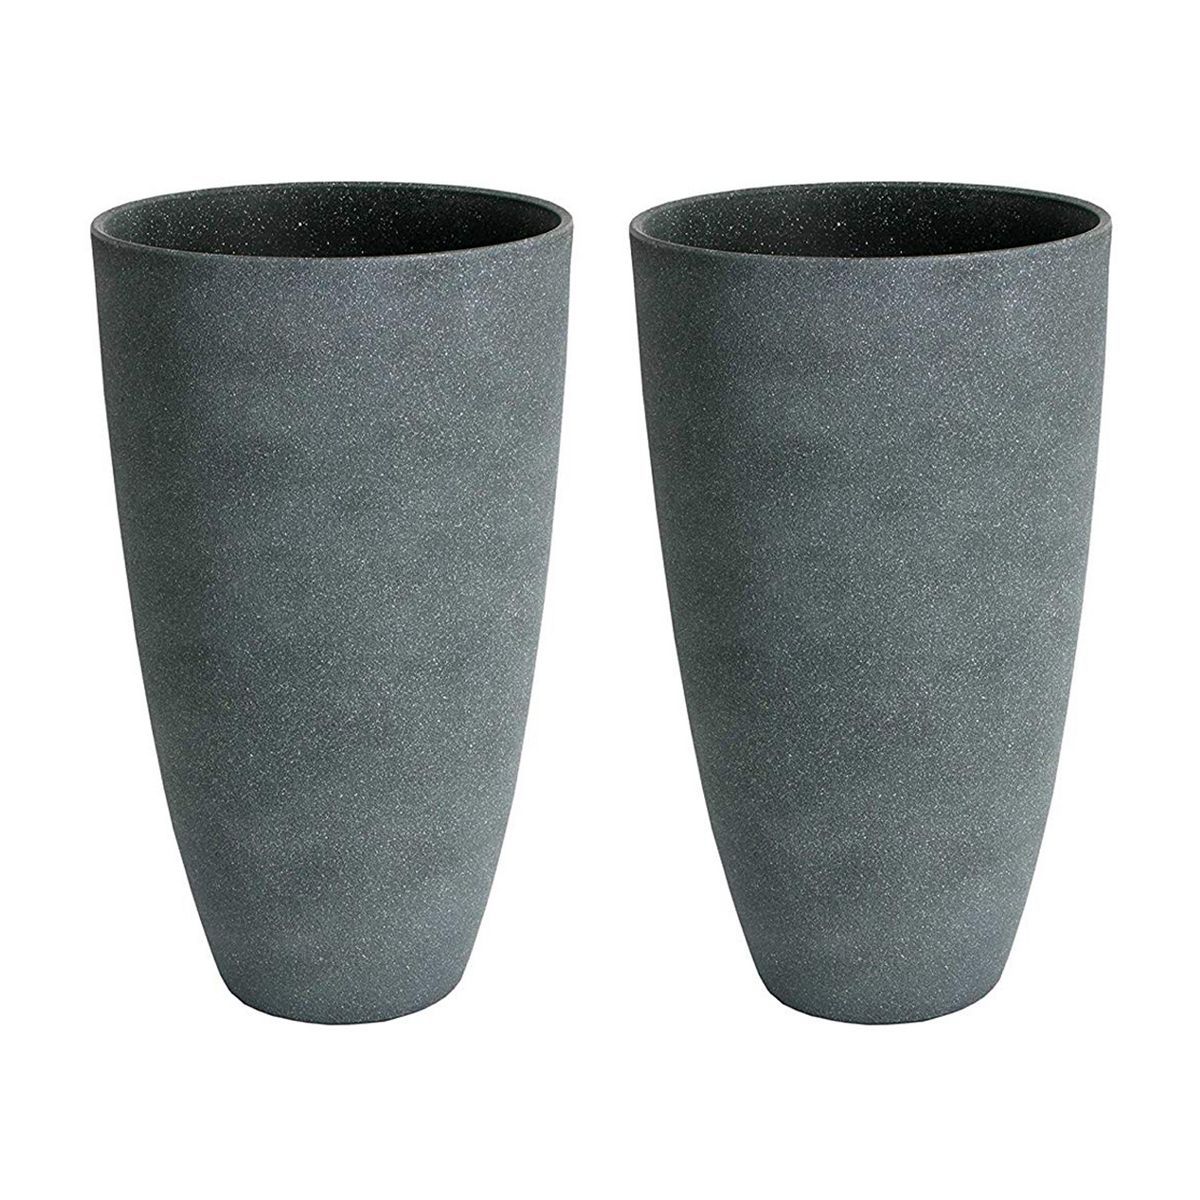 Algreen Acerra Weather Resistant Composite Tall Vase Round Planter Pot 20 x 12 x 12 Inches, Gray ... | Target